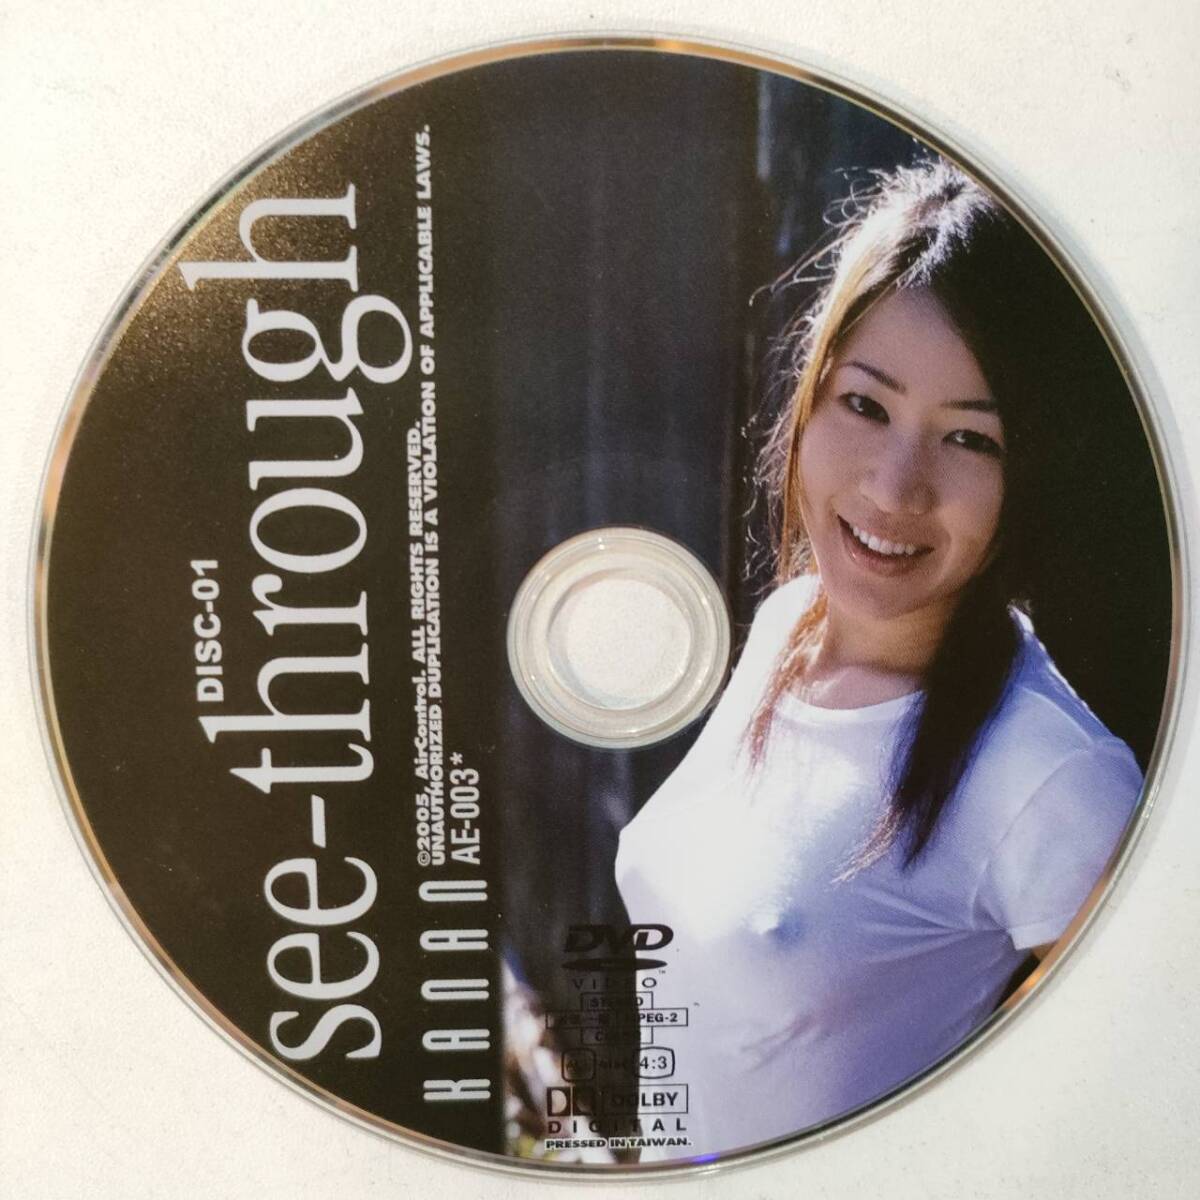 disc only 2 sheets set rare flower south [see-through] 2005 year regular goods image DVD IV. ultra records out of production cell used idol gravure put on ero